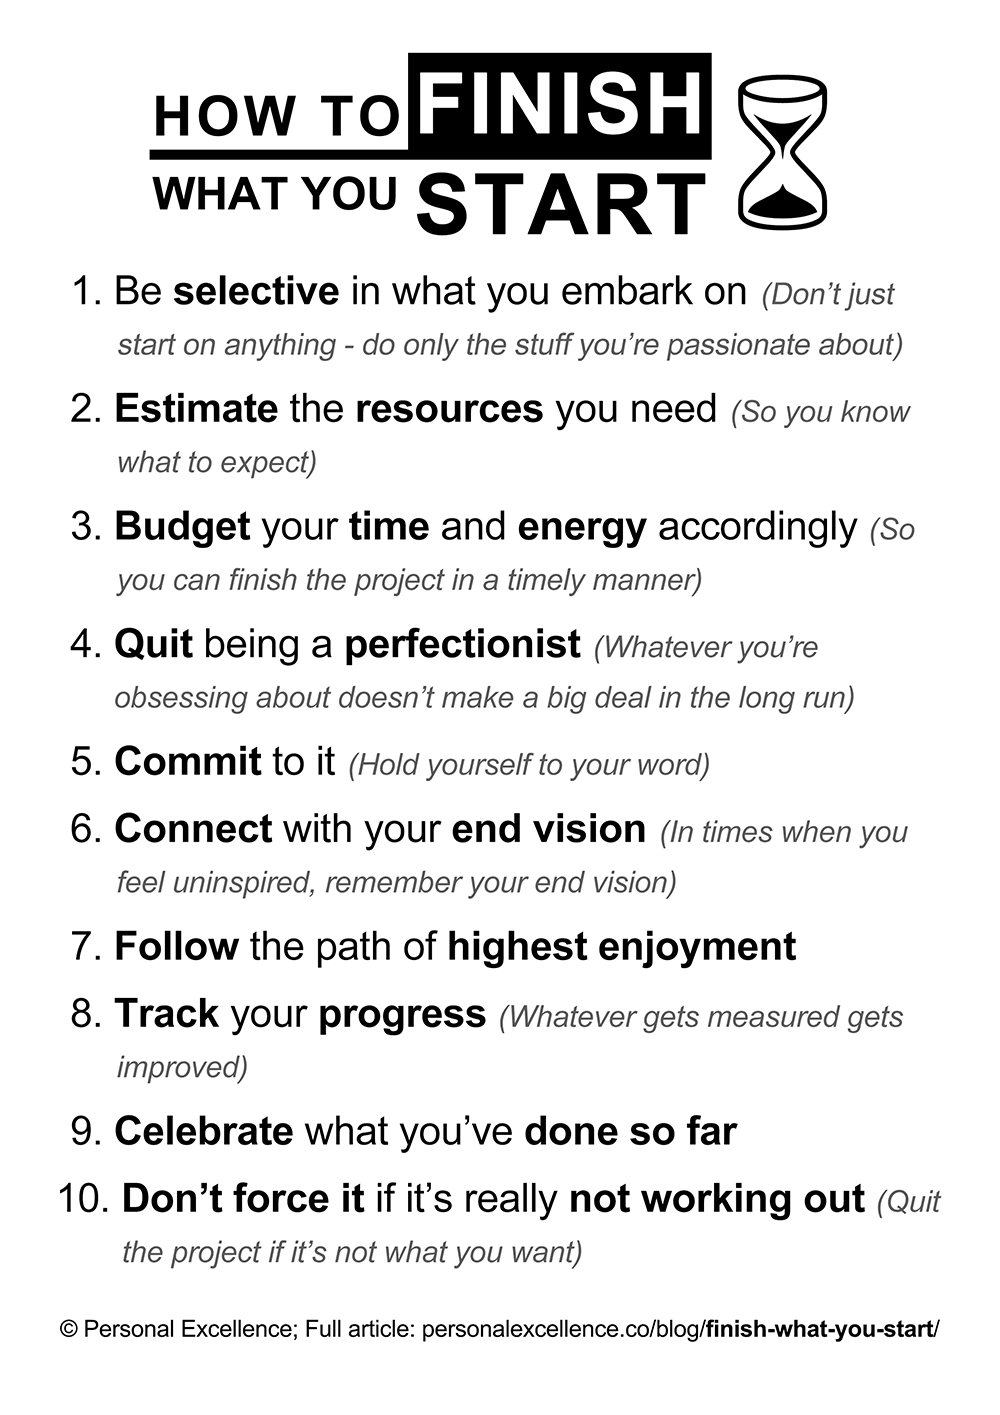 https://personalexcellence.co/files/manifesto-finish-what-you-start.gif